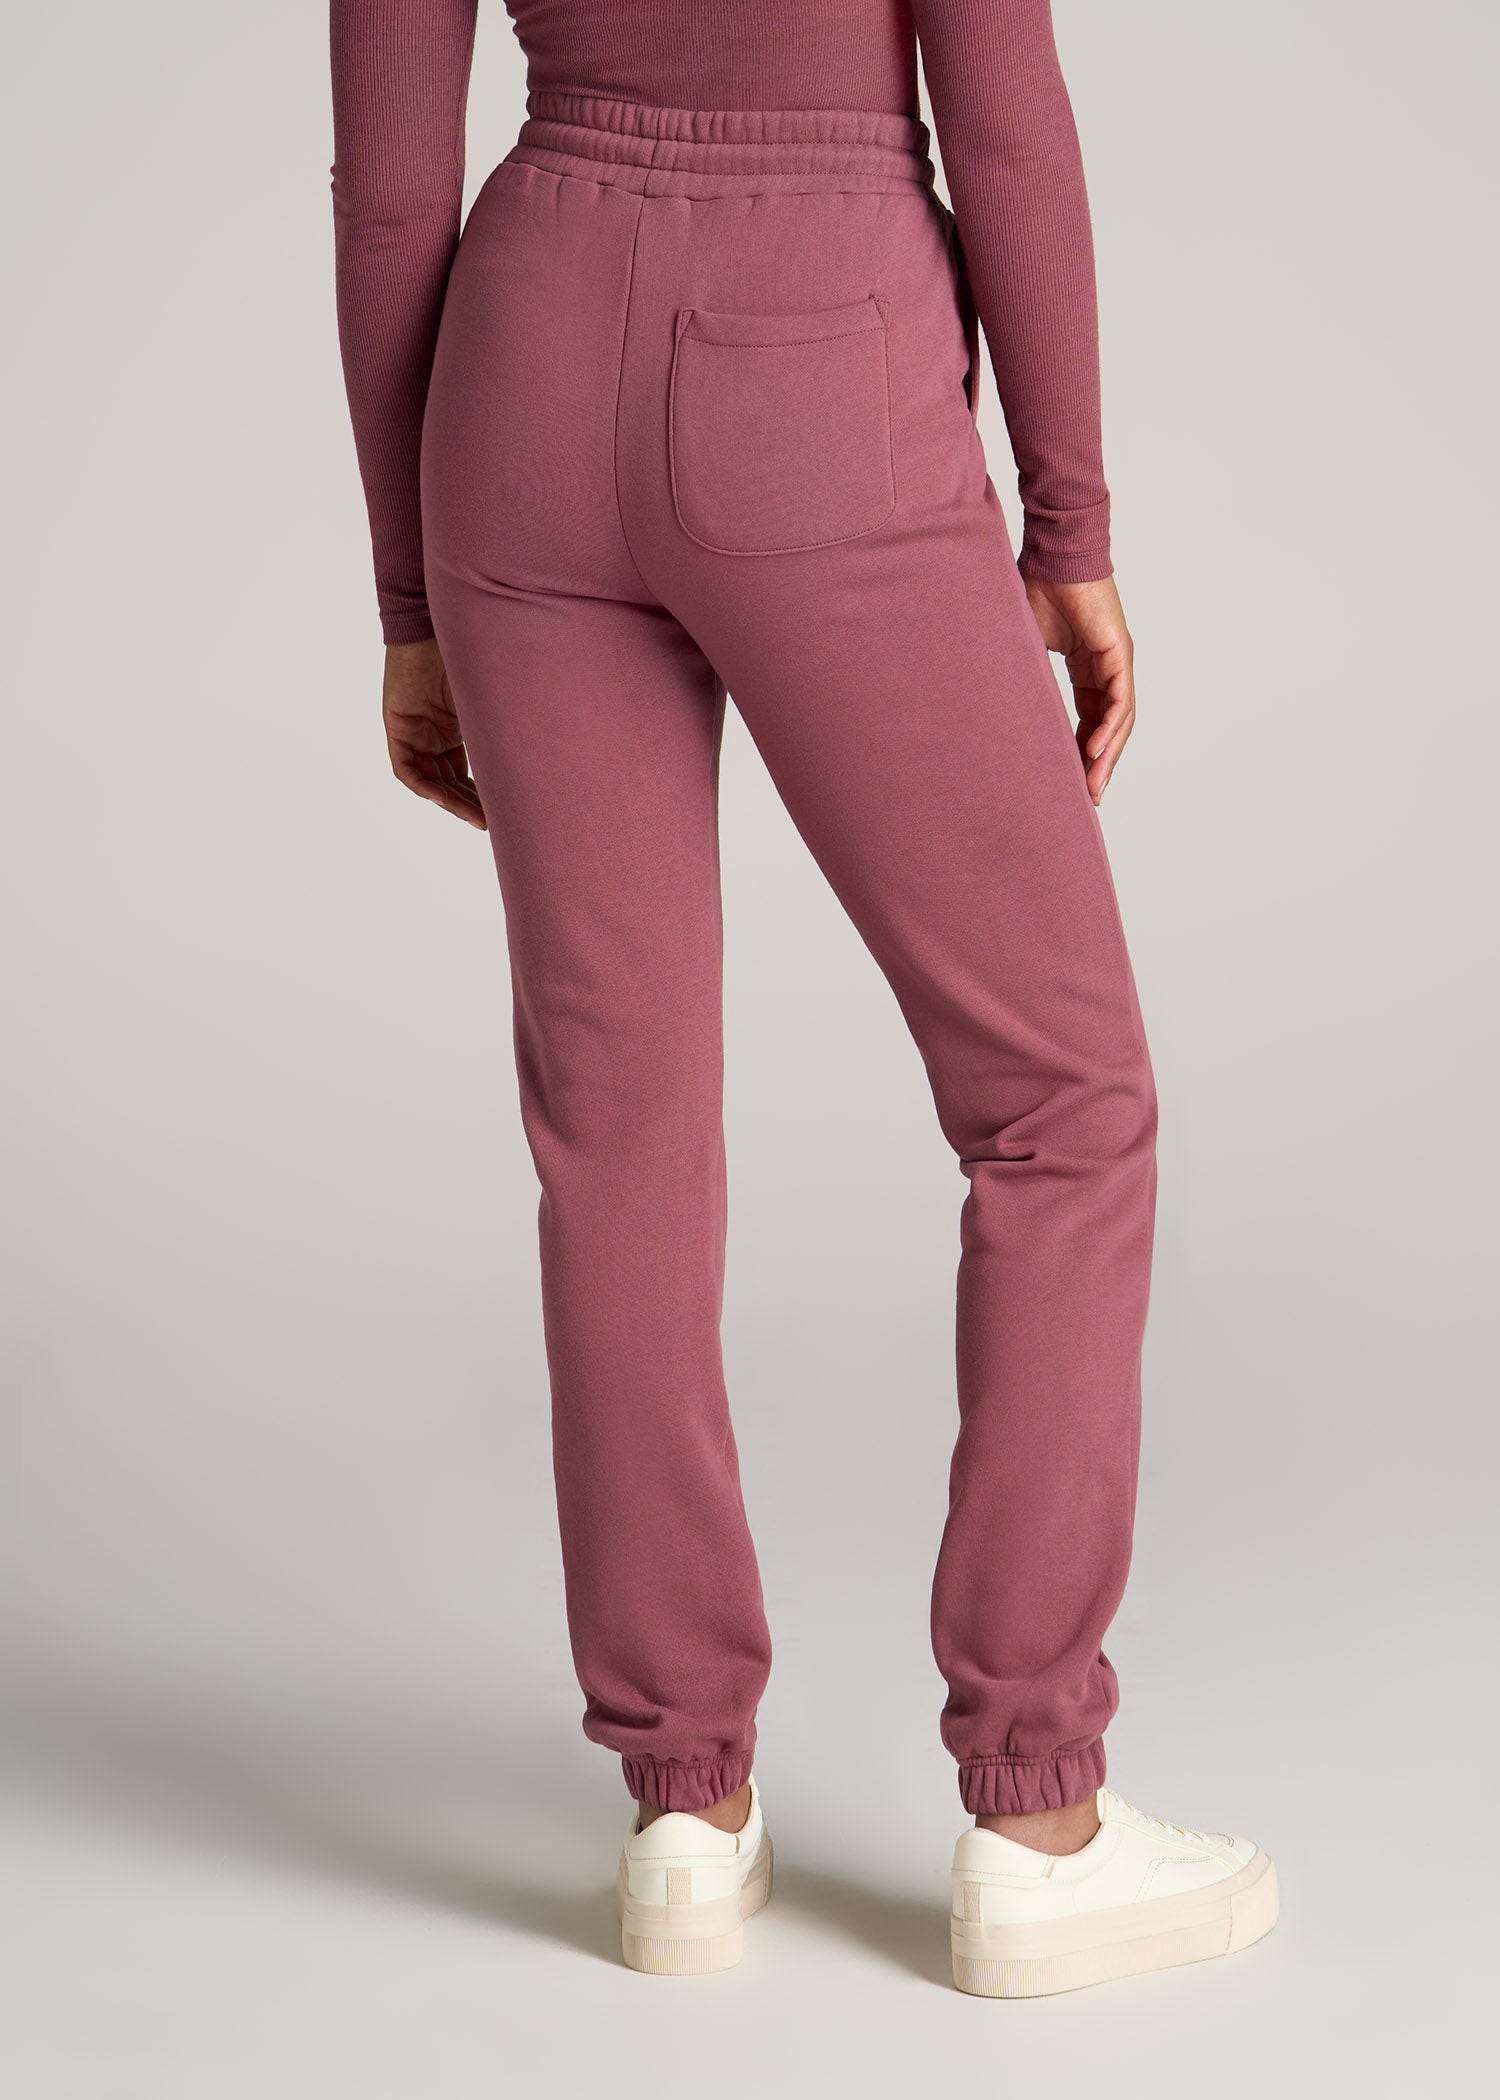 Women Sweatpants Solid Color Tracksuit Women High Waist Stretchy Women  Ankle Length Pants With Two Front Pockets And Split Hem